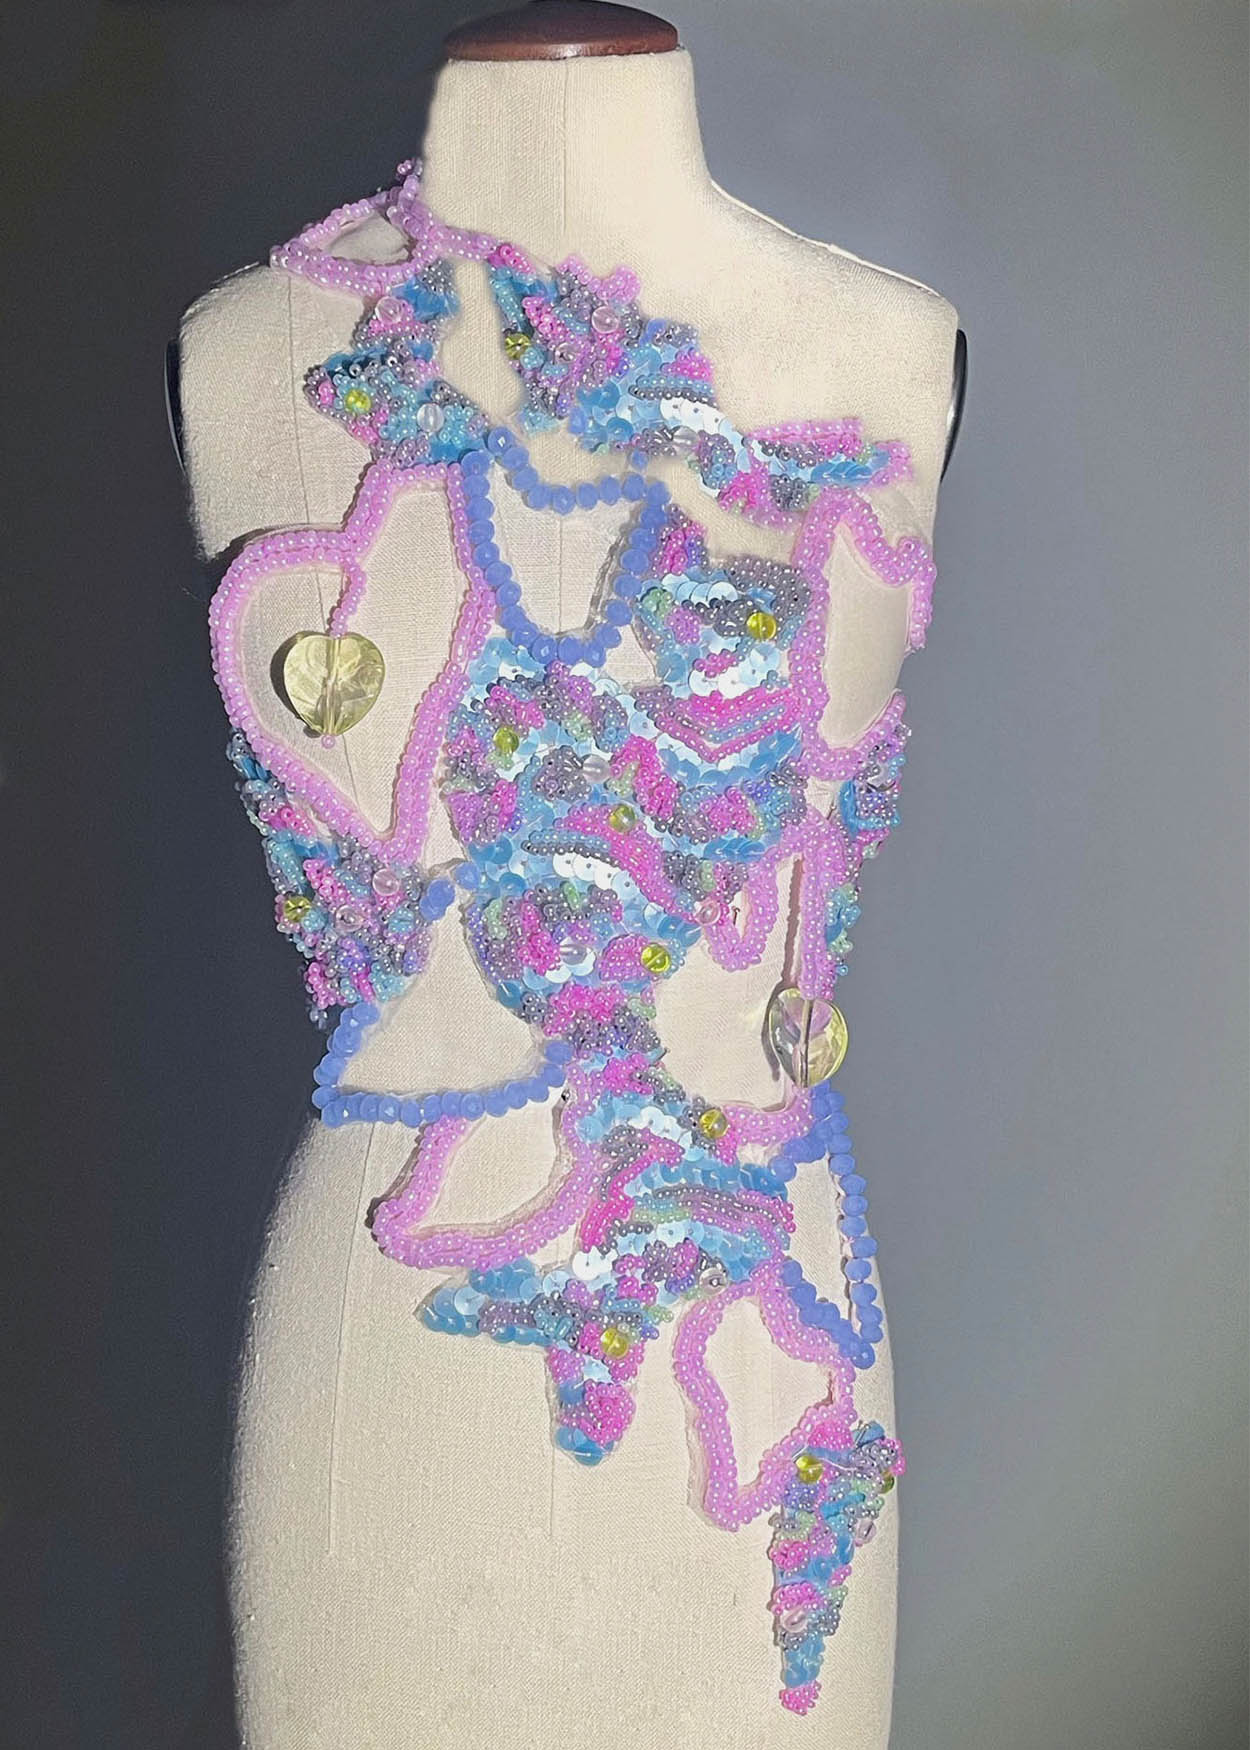 Beaded structure fashioned as a top on a mannequin by Tash Conquest.